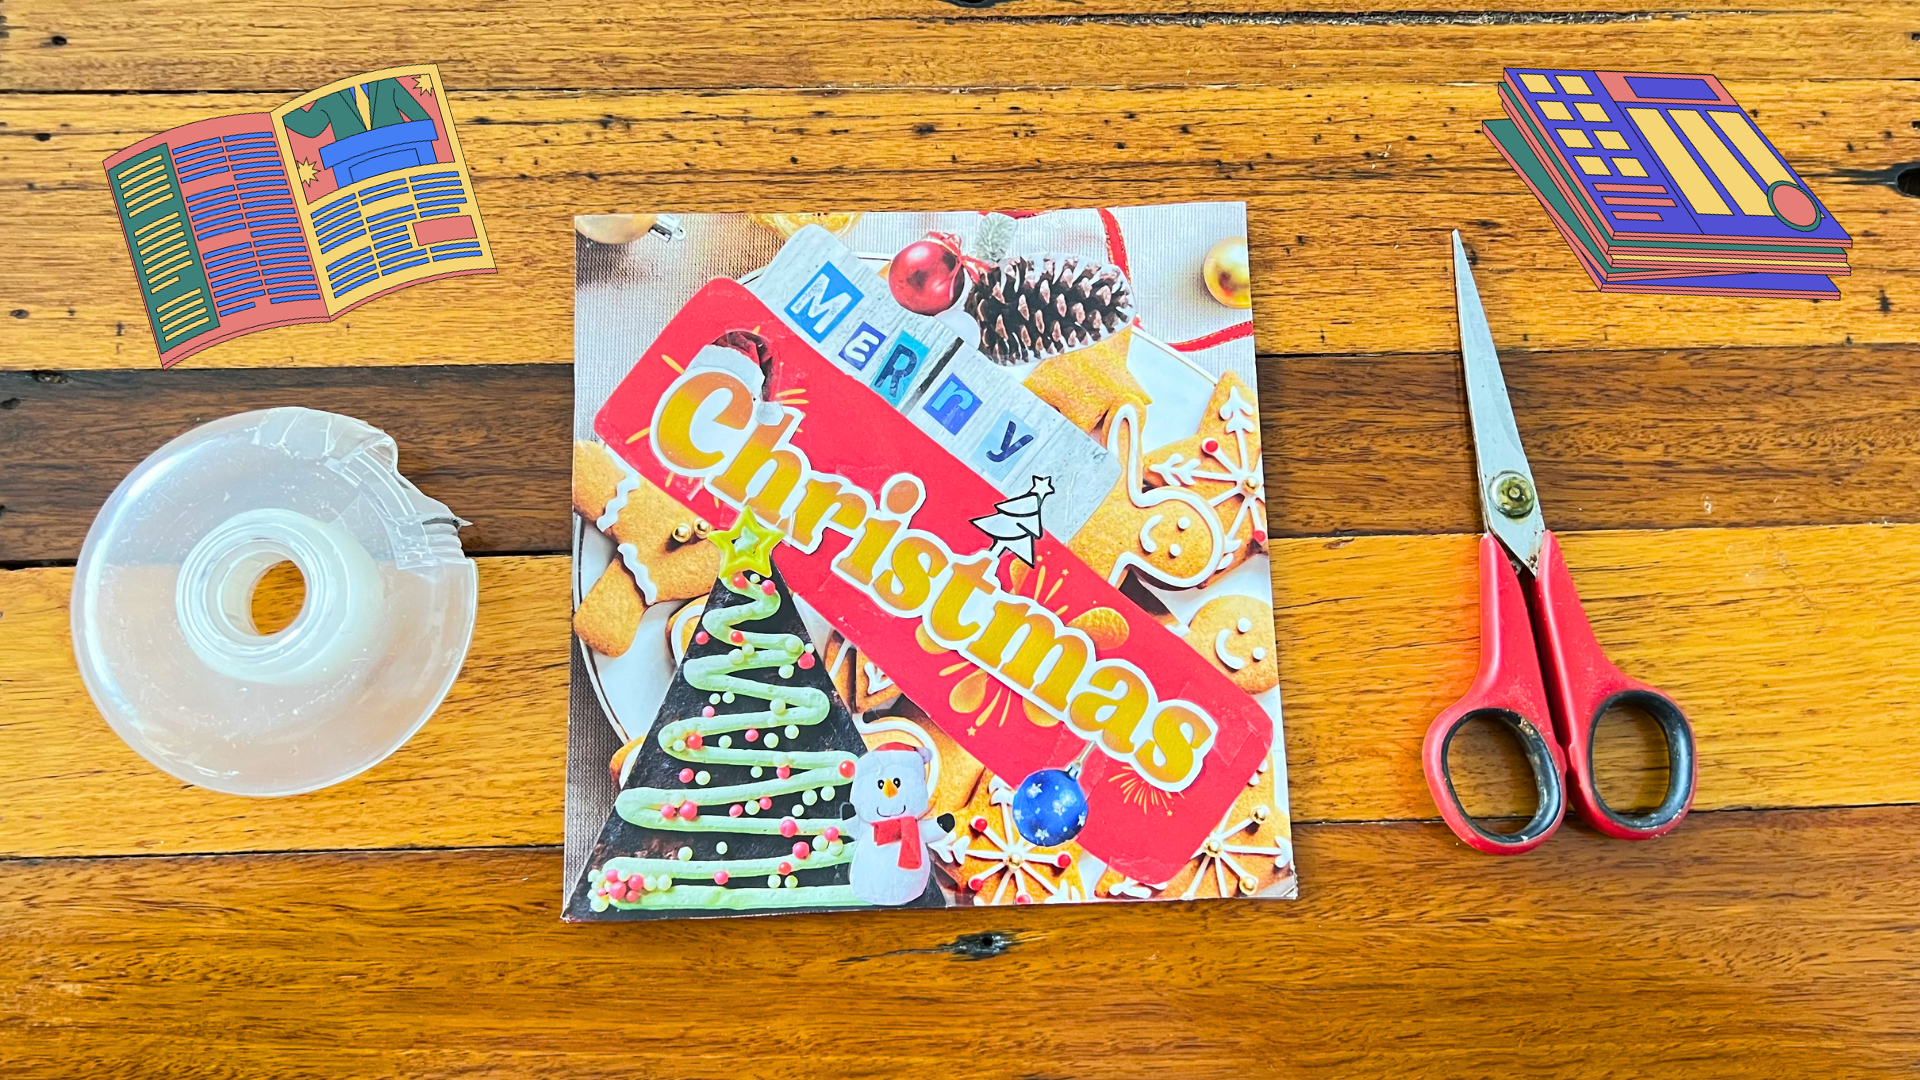 A holiday Christmas card collage craft saying "Merry Christmas" with tape, scissors, and graphics of magazines against a wooden table. This is one idea for crafts for kids using old magazines.